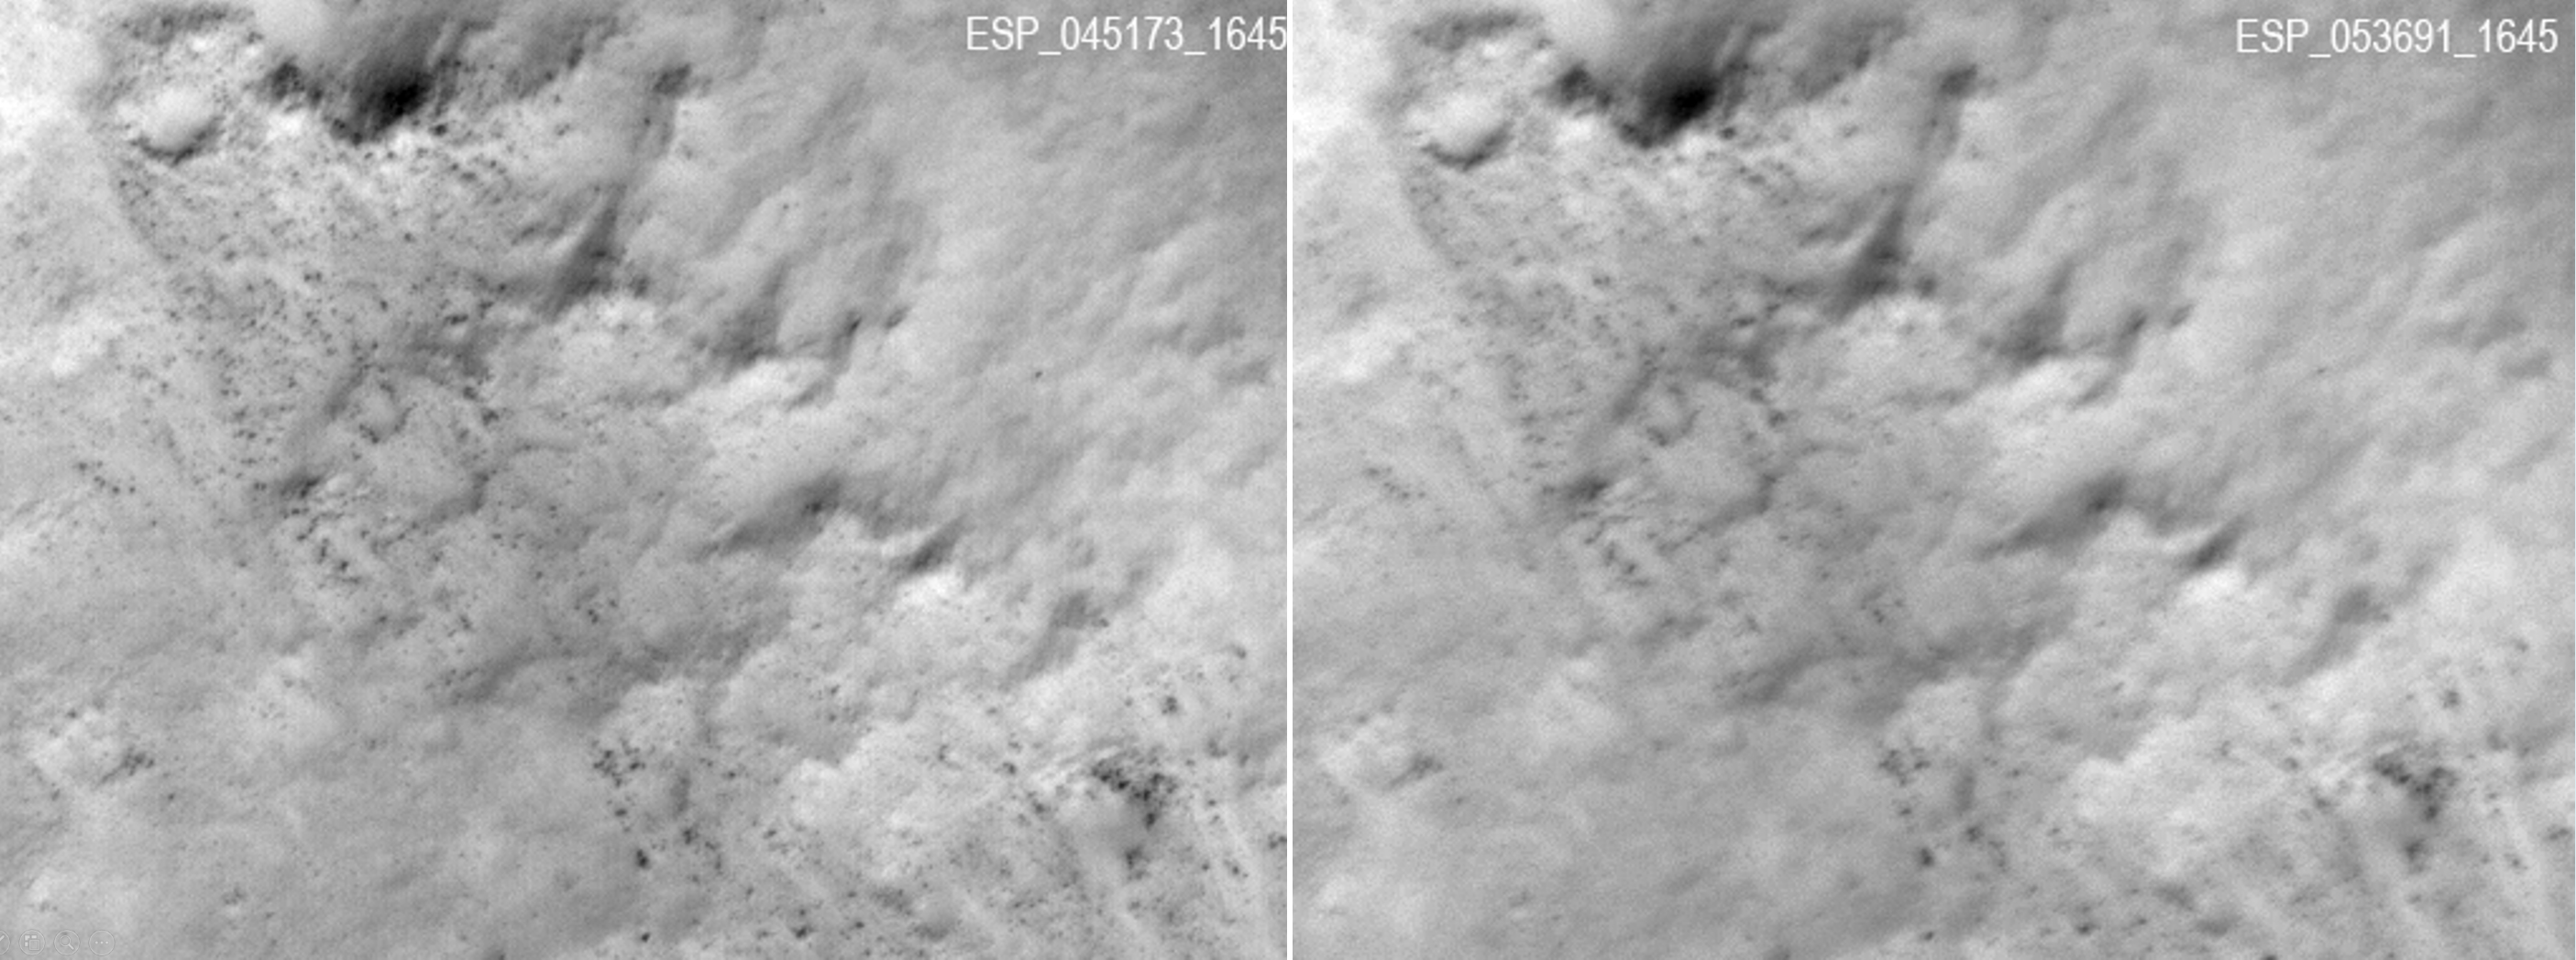 MRO images side by side